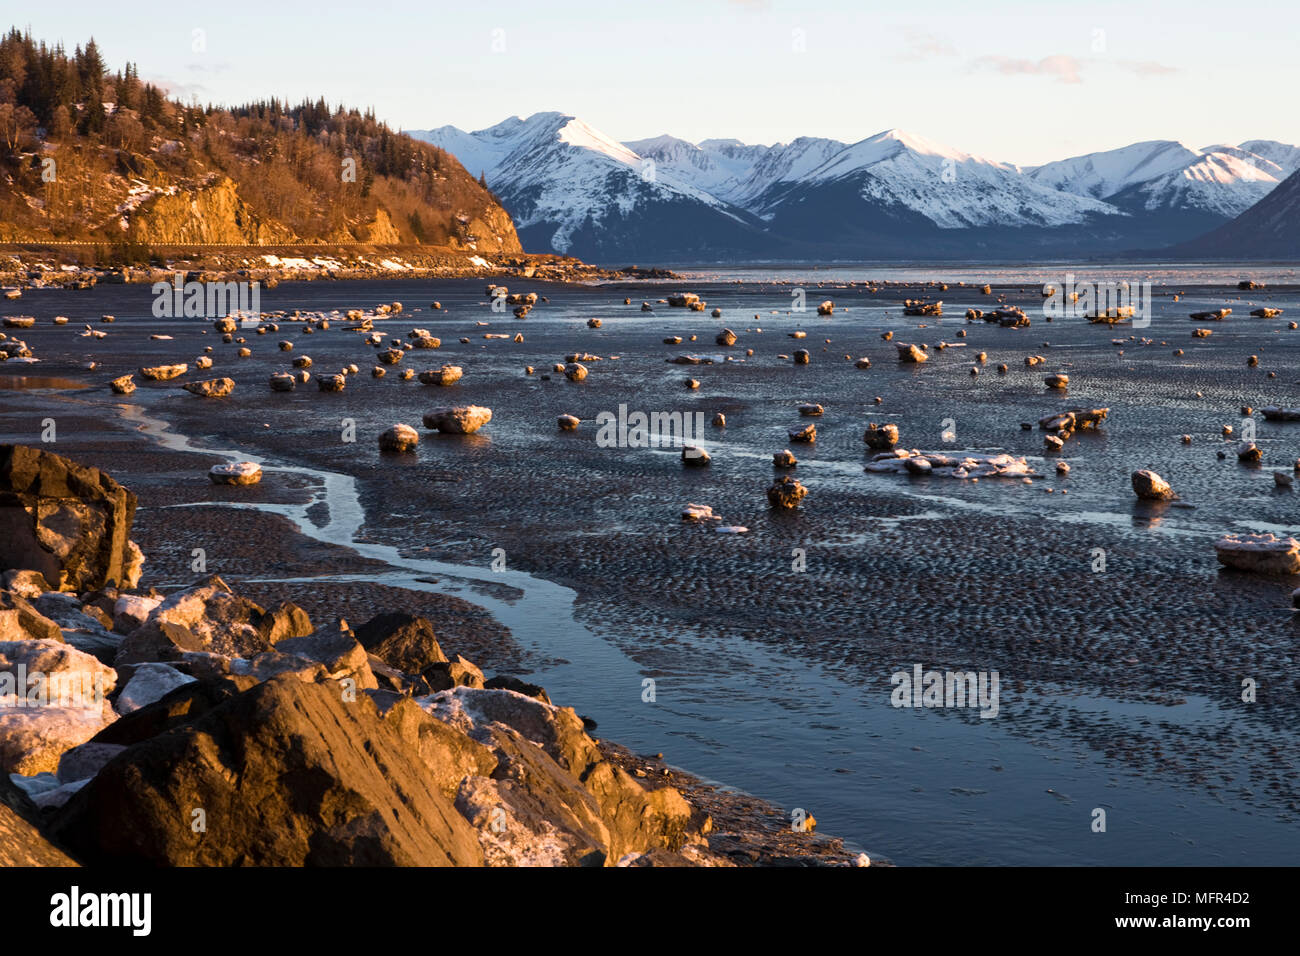 Turnagain Arm with the snow capped Kenai mountains in the distance. The low tide reveals the mud flats which are both beautiful and treacherous, as th Stock Photo